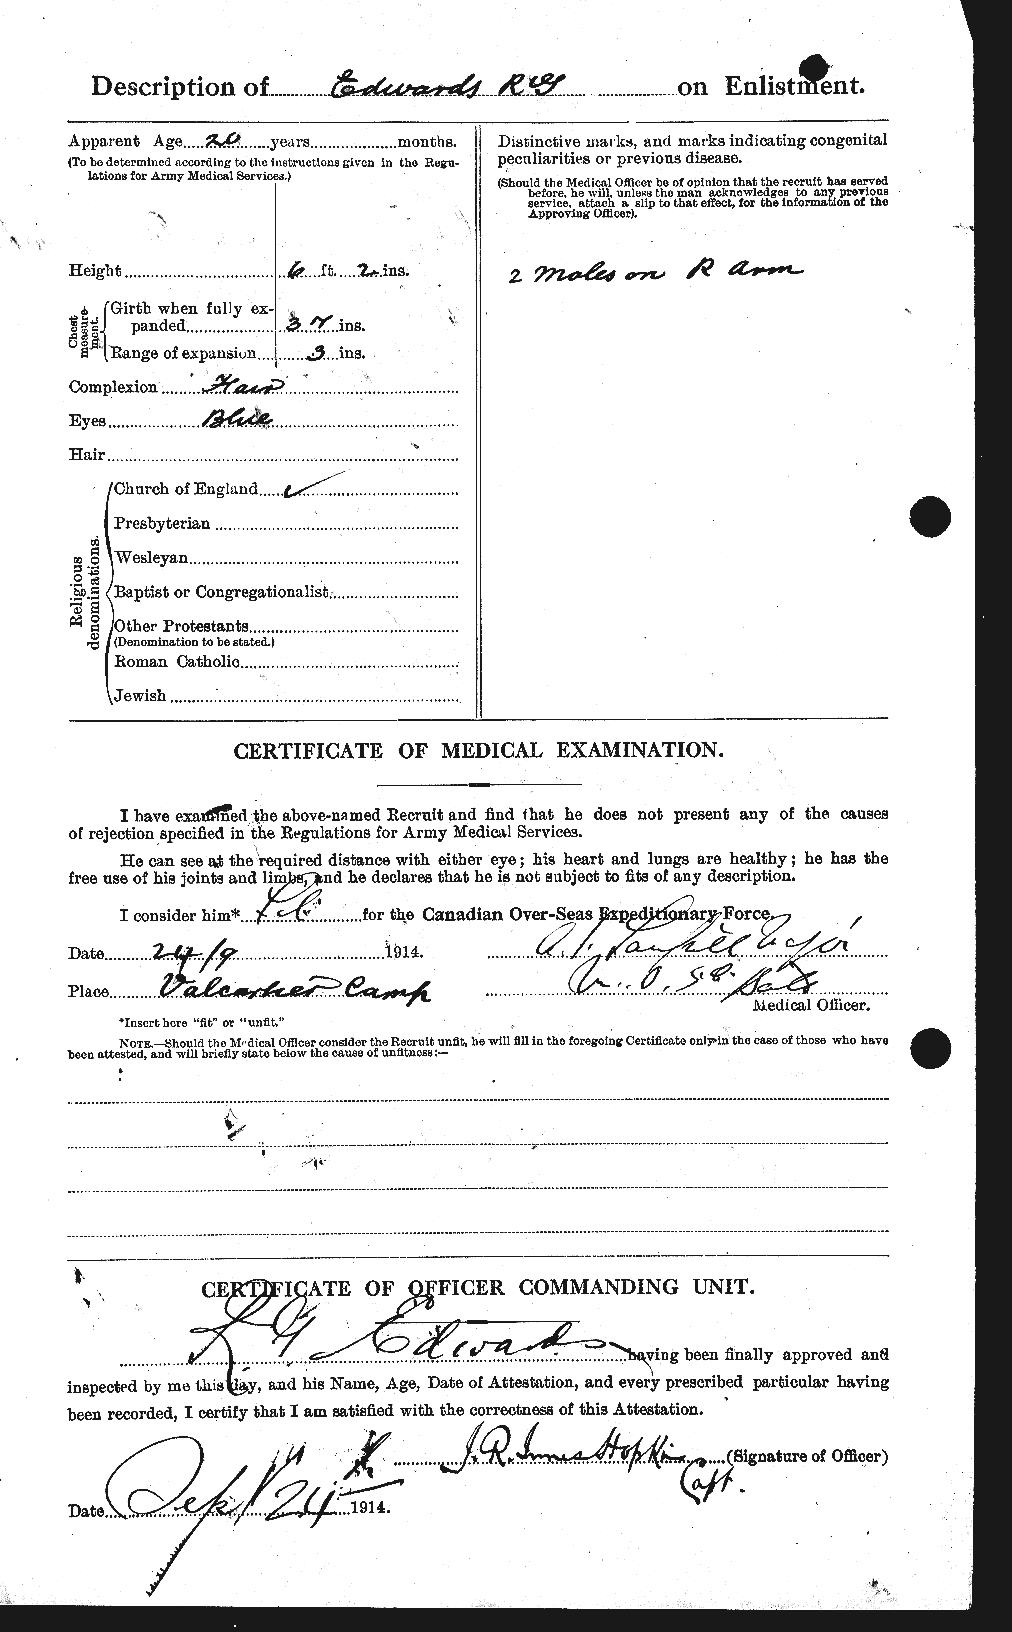 Personnel Records of the First World War - CEF 310289b